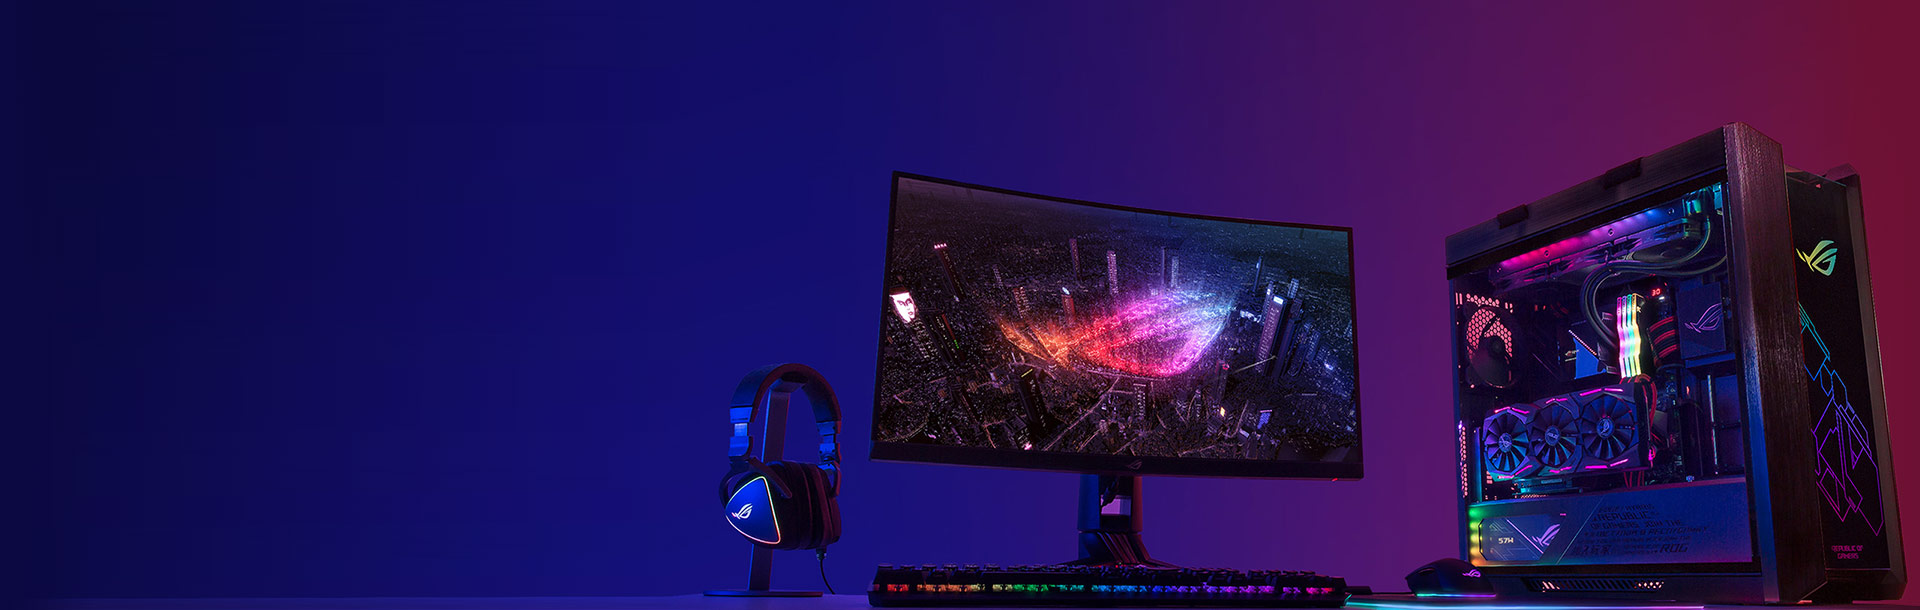 ROG Strix Z690-A Gaming WiFi D4 features diverse ROG ecosystem